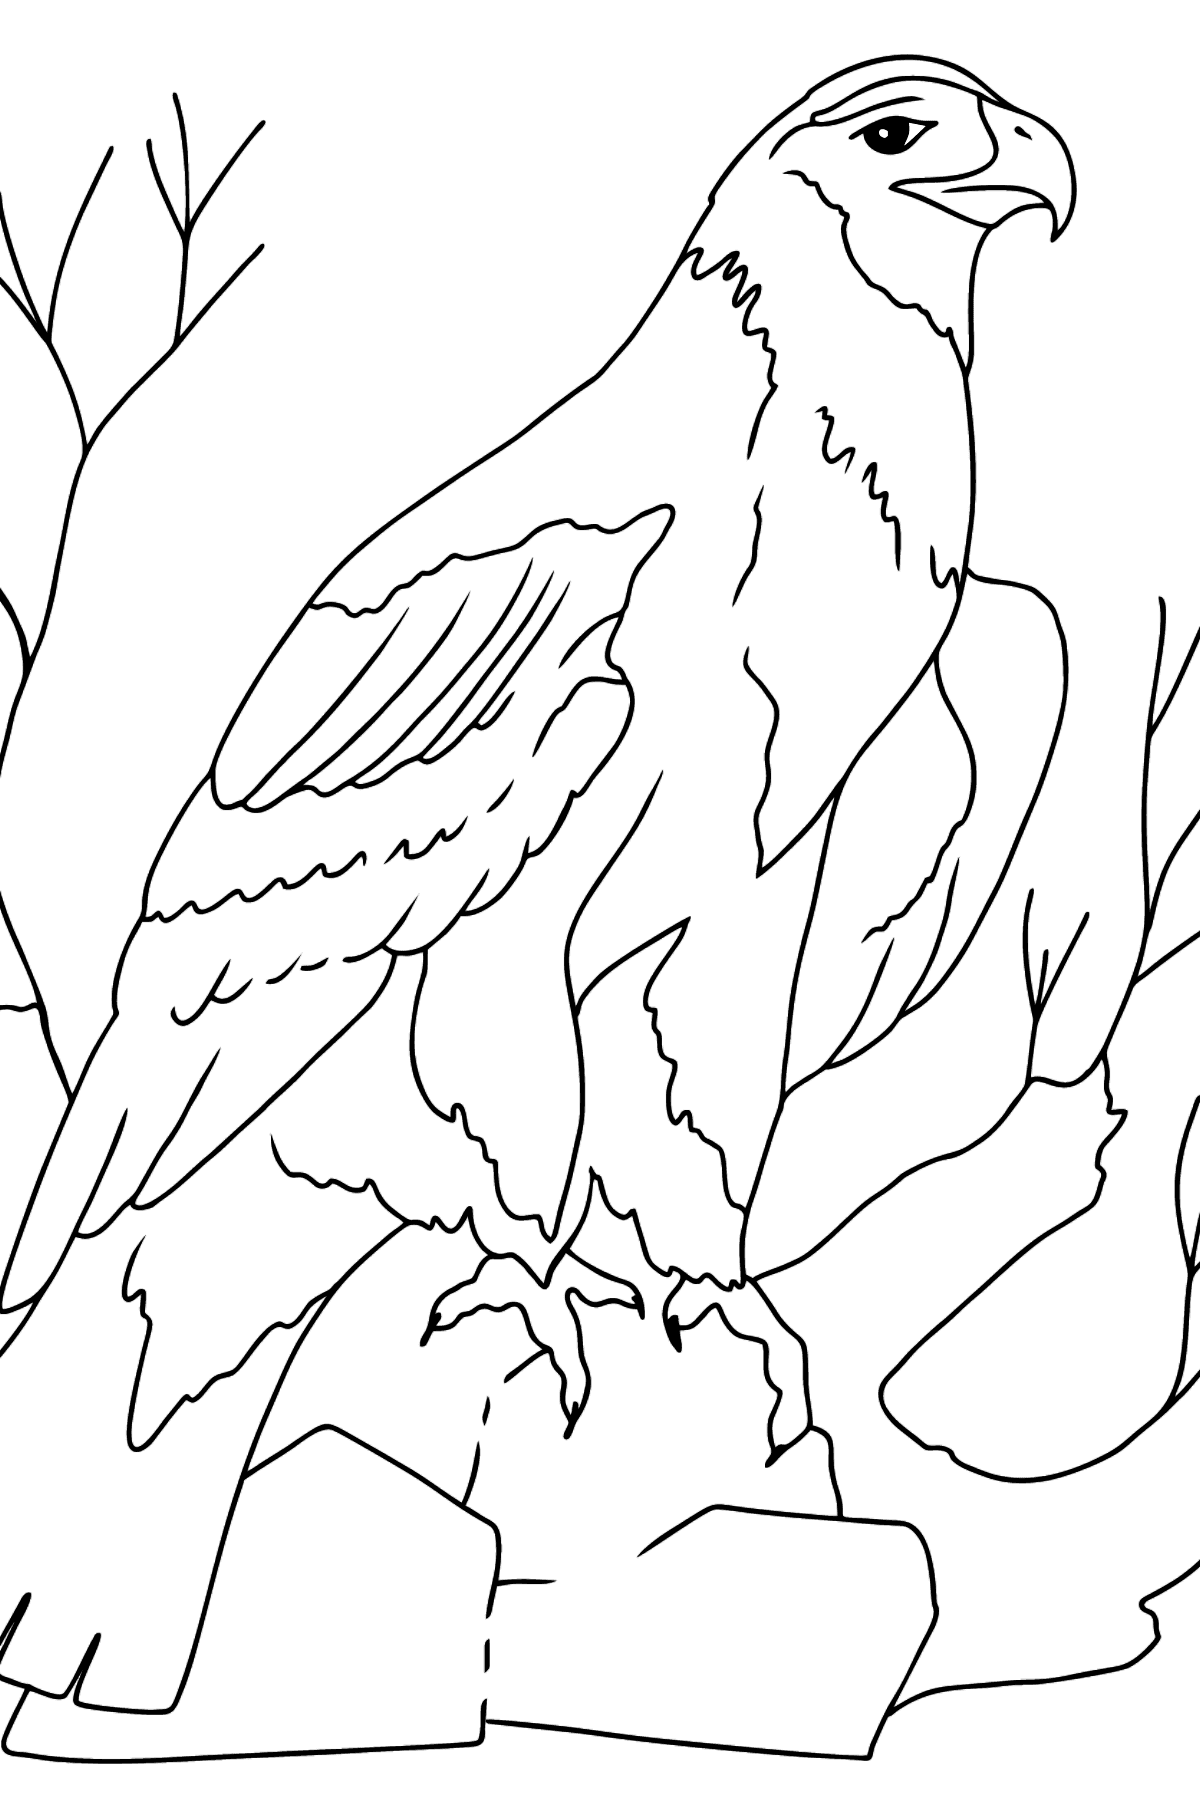 Coloring Page - An Eagle is on the Hunt - Coloring Pages for Kids